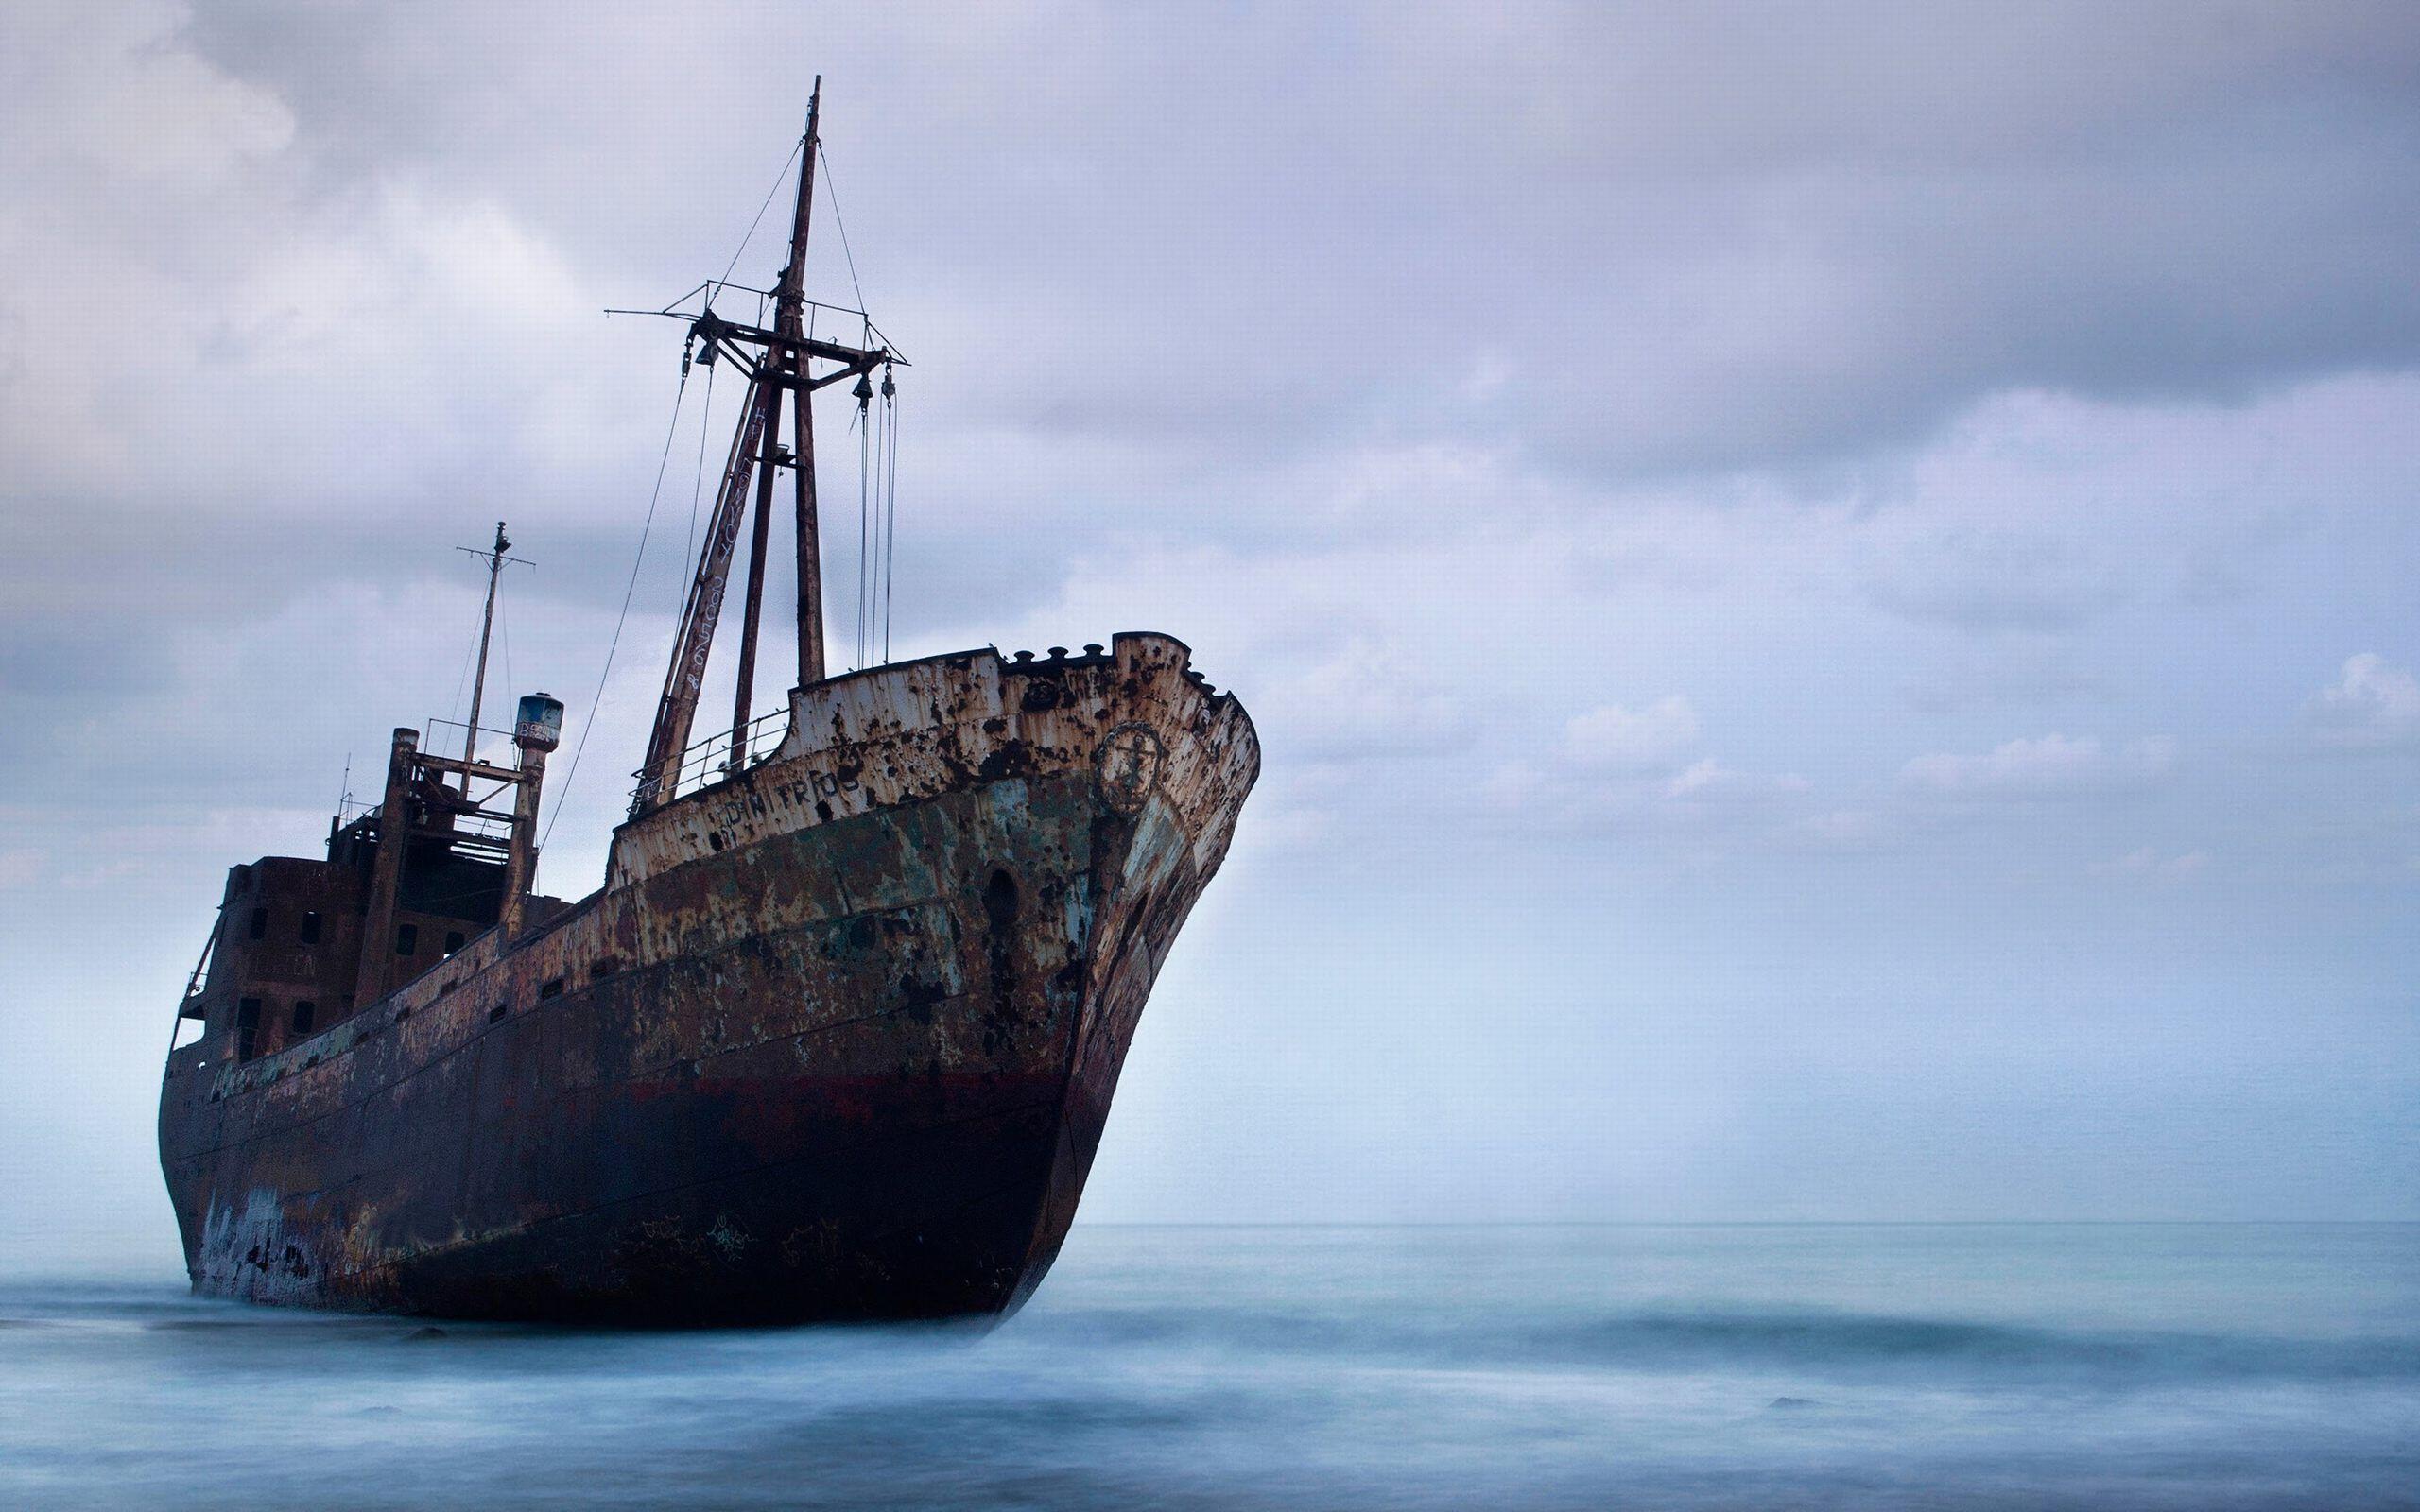 Old Ship Wallpaper Android